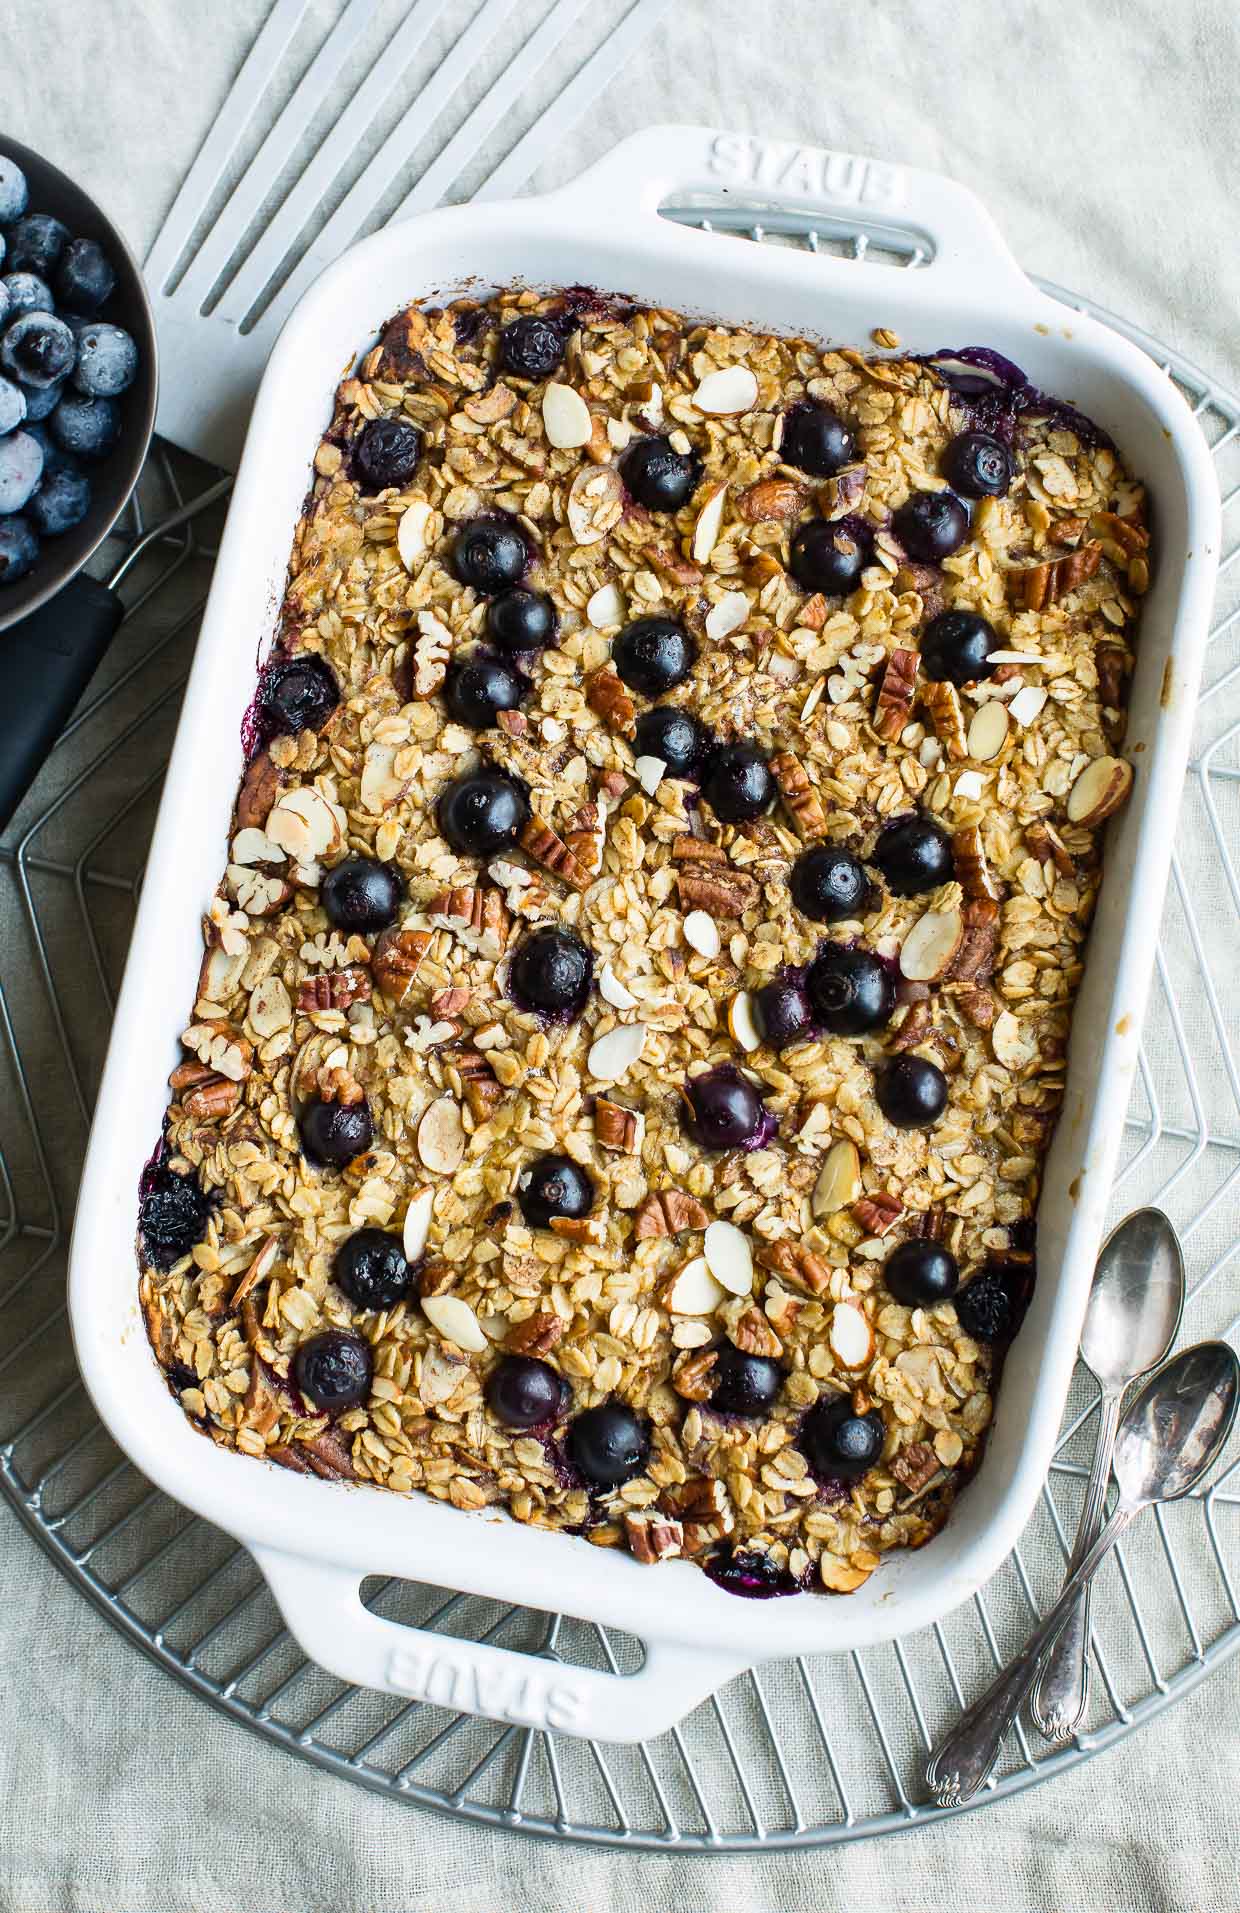 Blueberry Baked Oatmeal in Baking Dish